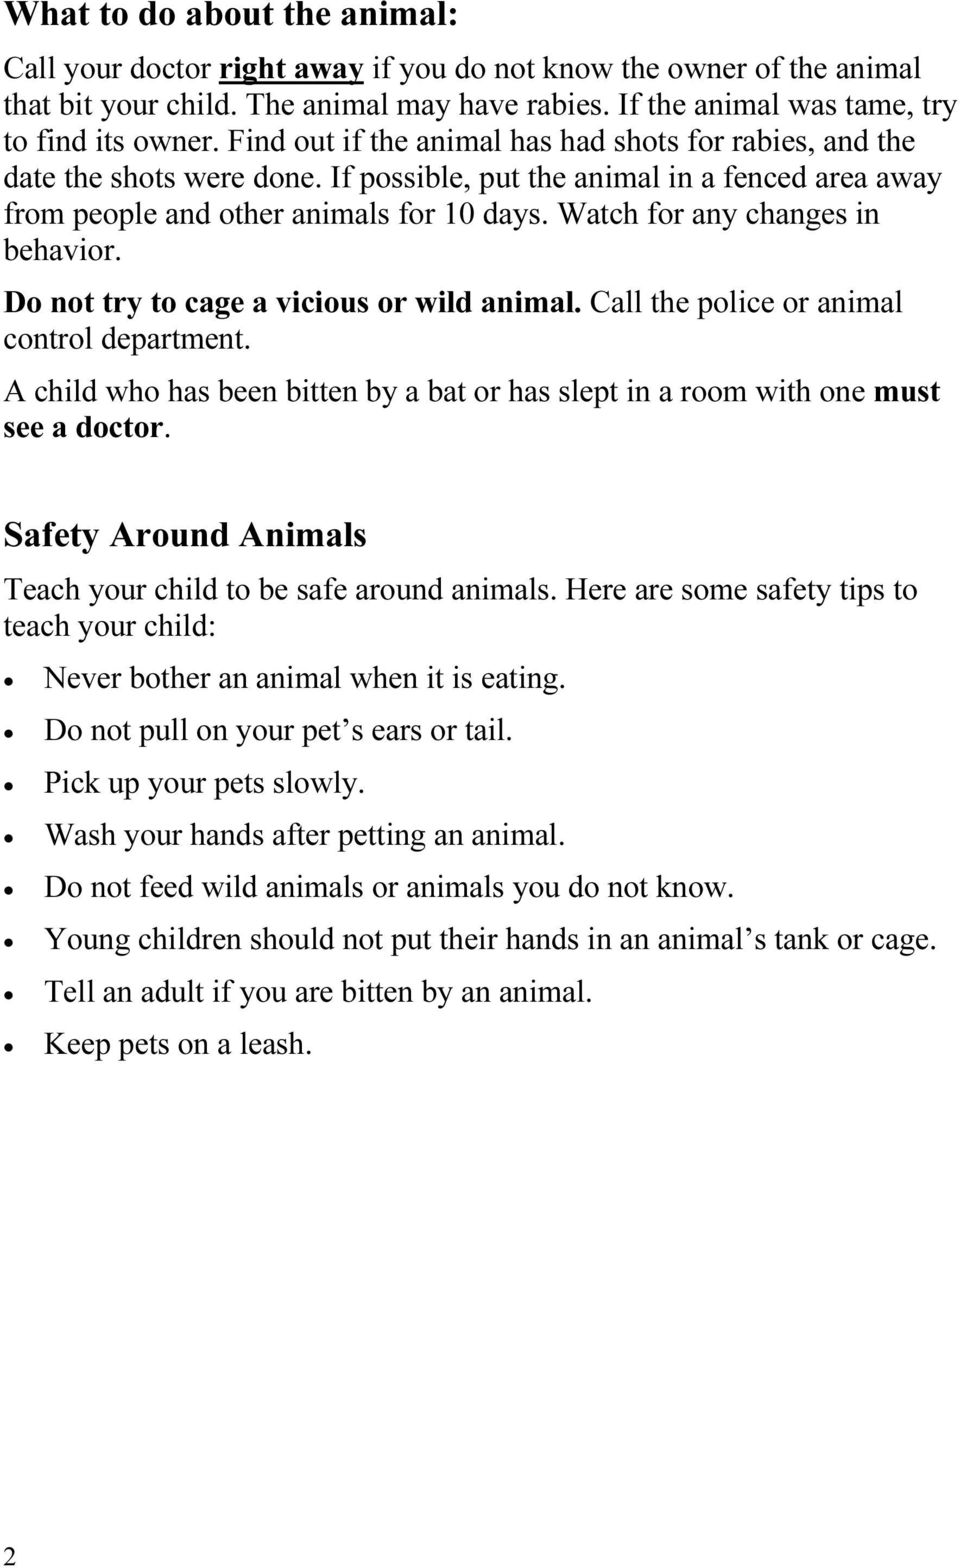 Watch for any changes in behavior. Do not try to cage a vicious or wild animal. Call the police or animal control department.